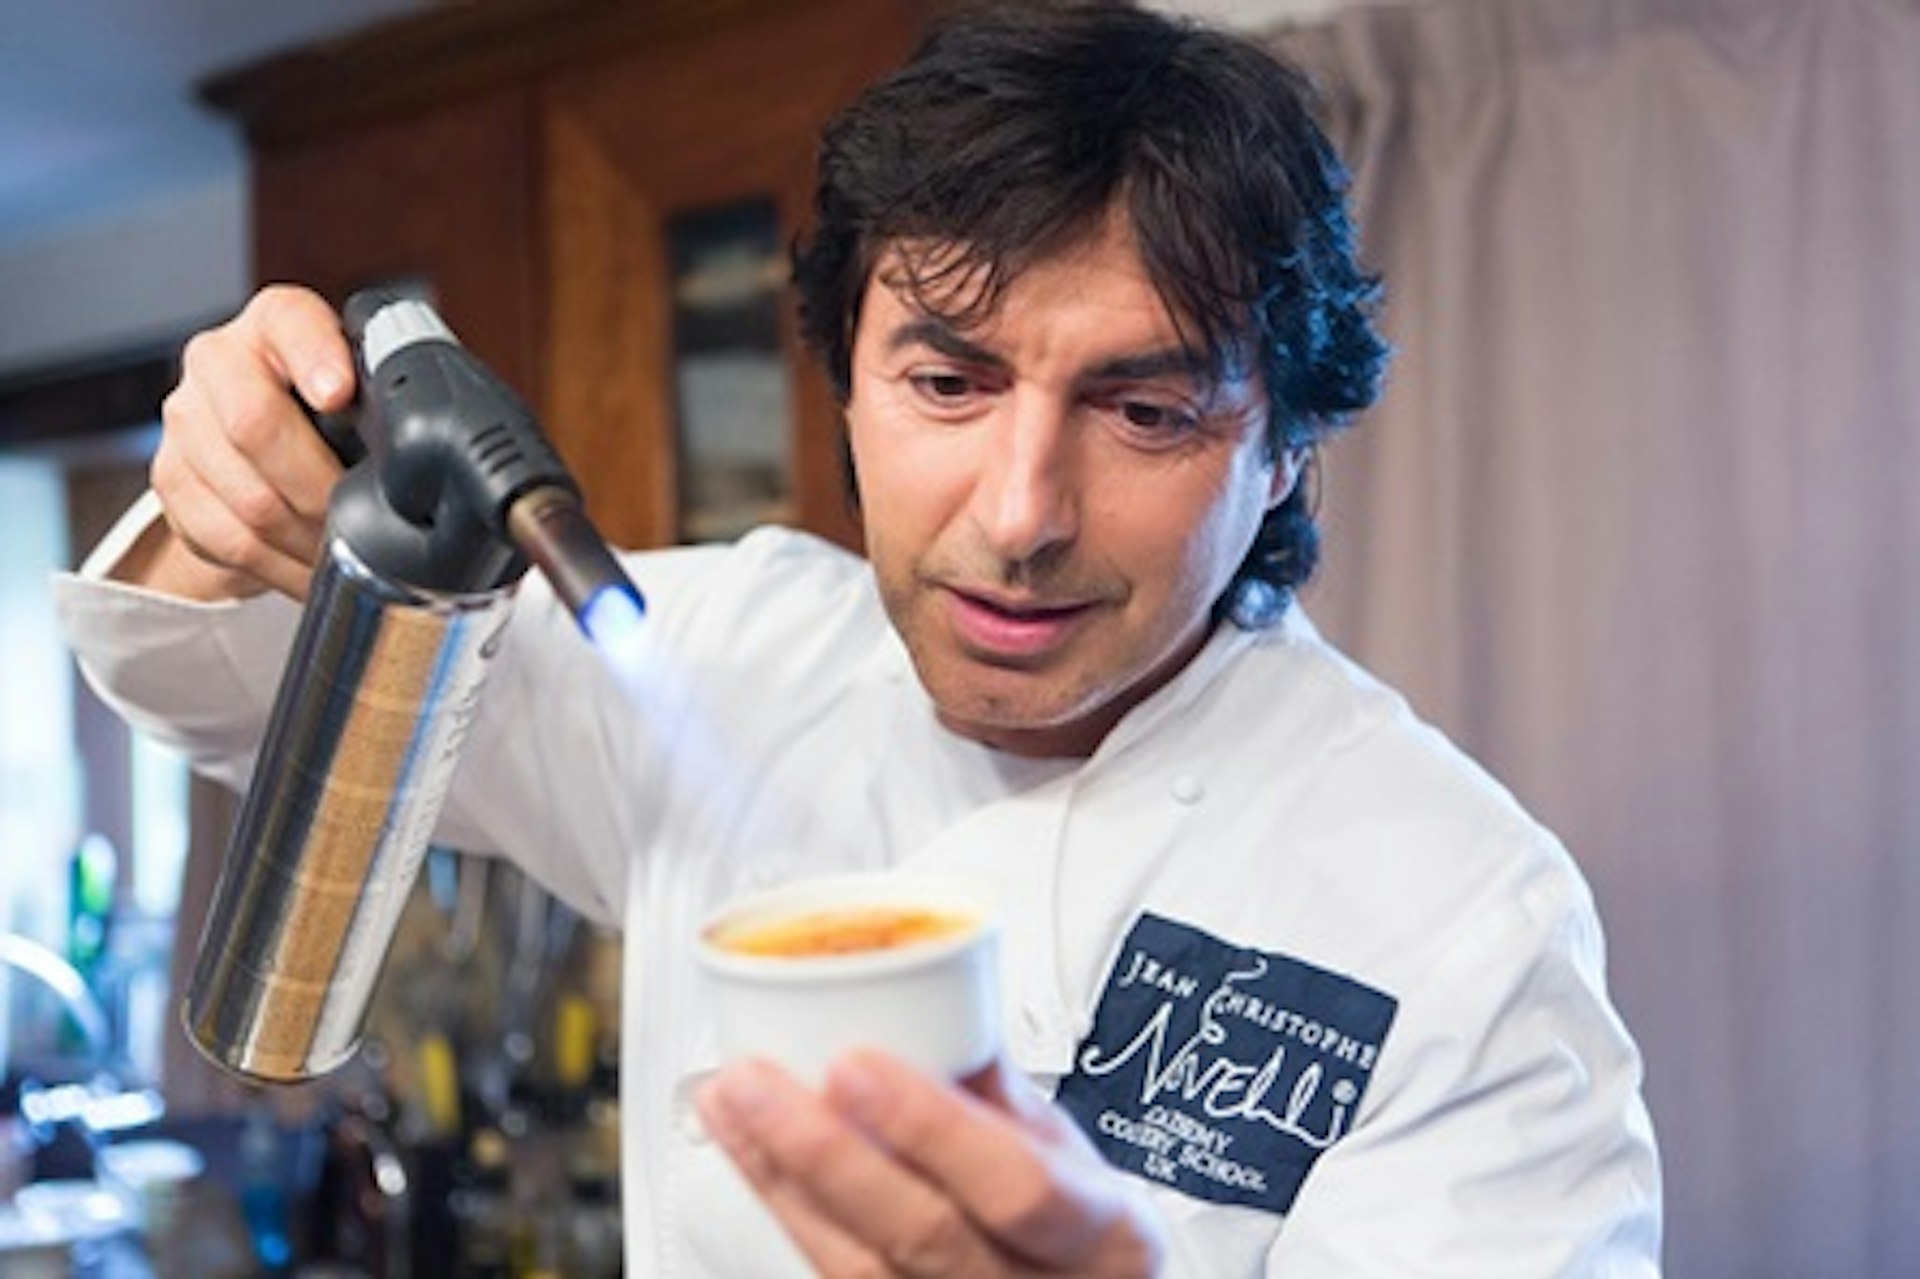 Intensive Cookery Masterclass with Jean-Christophe Novelli and Overnight Stay at a 4* Hotel